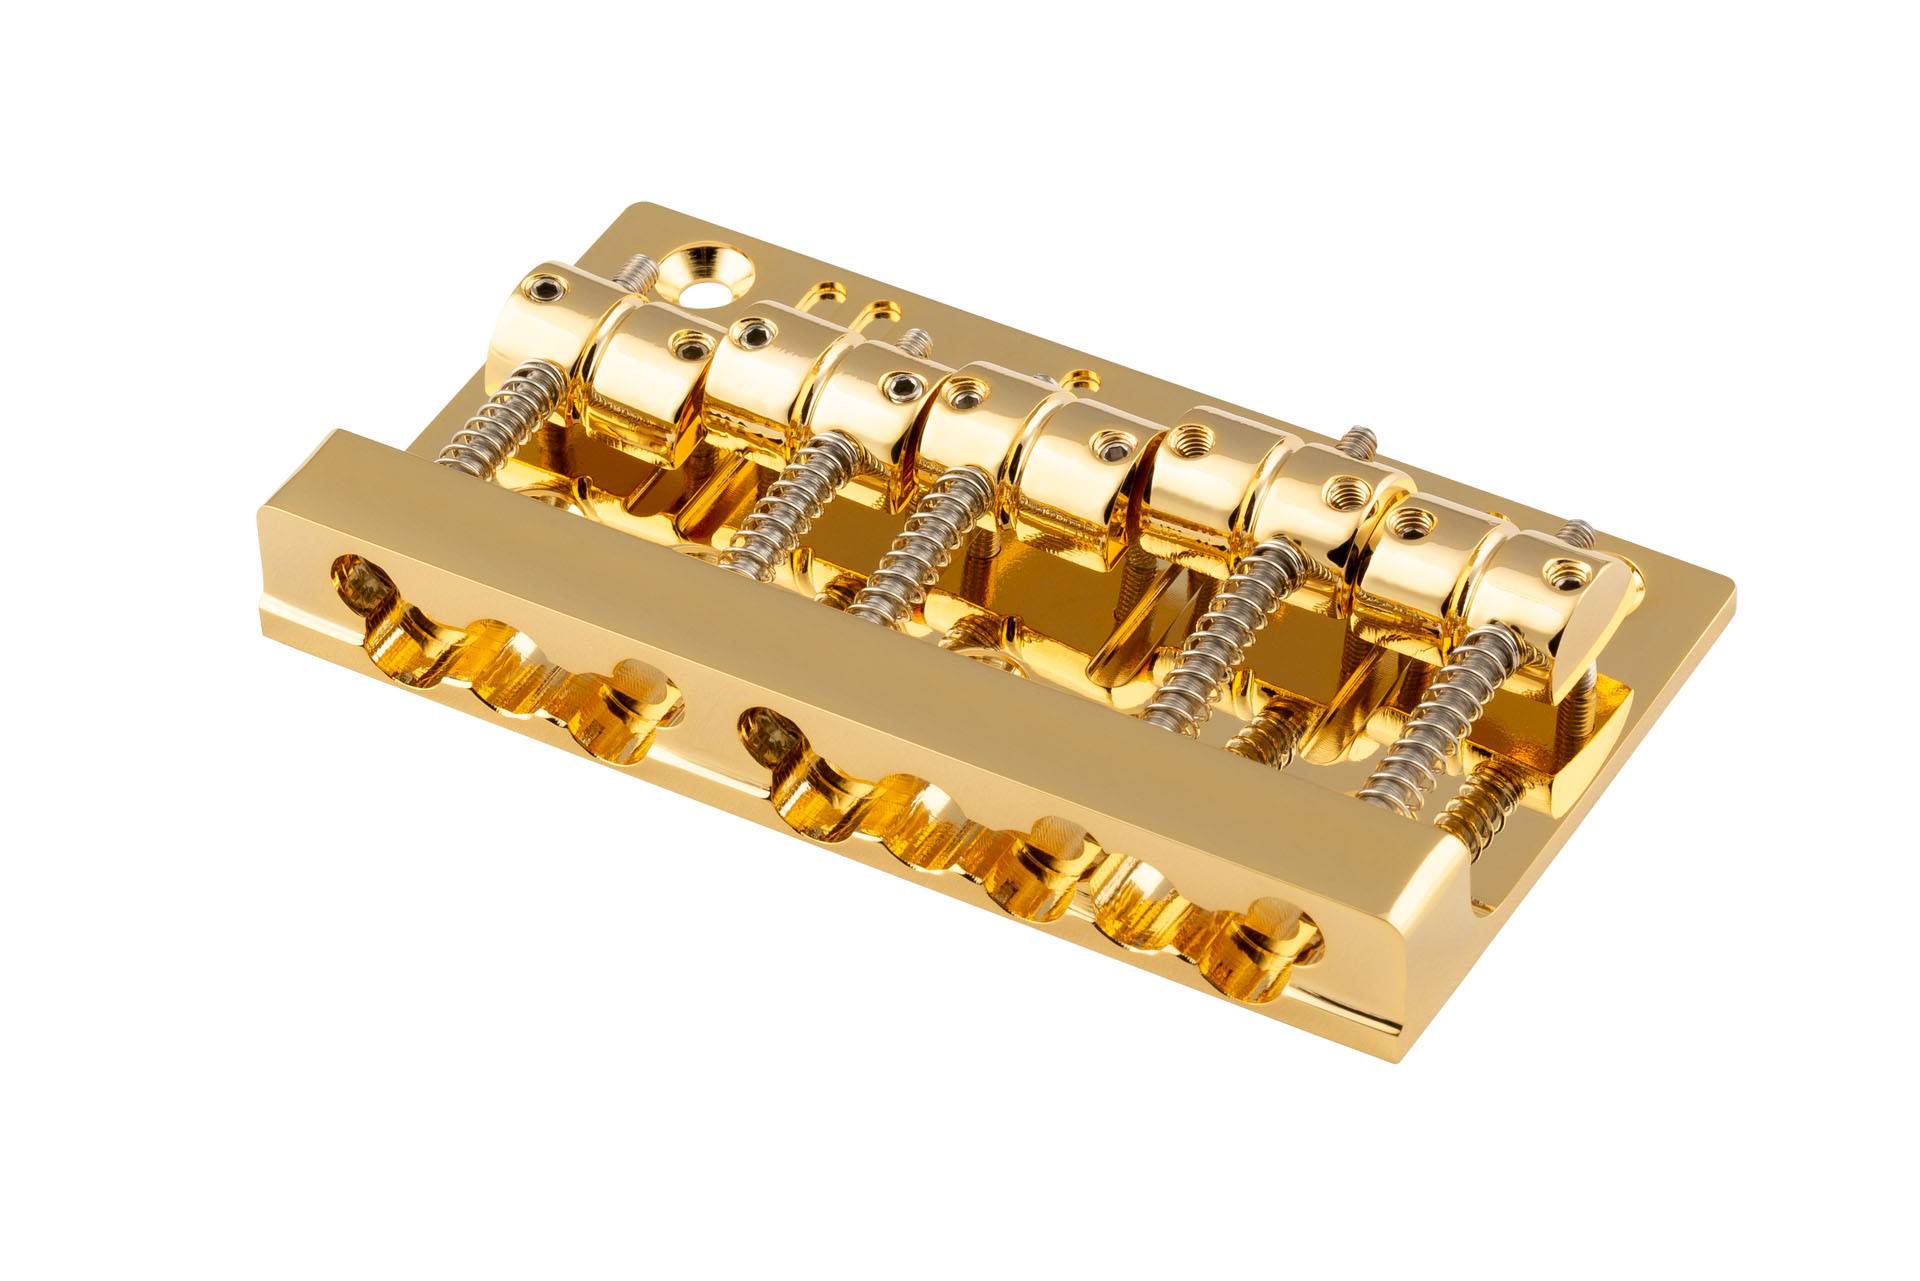 Sadowsky Parts - One Piece Quick Release Bridge SML & SMB Brass - 18 mm - 5 String - Gold